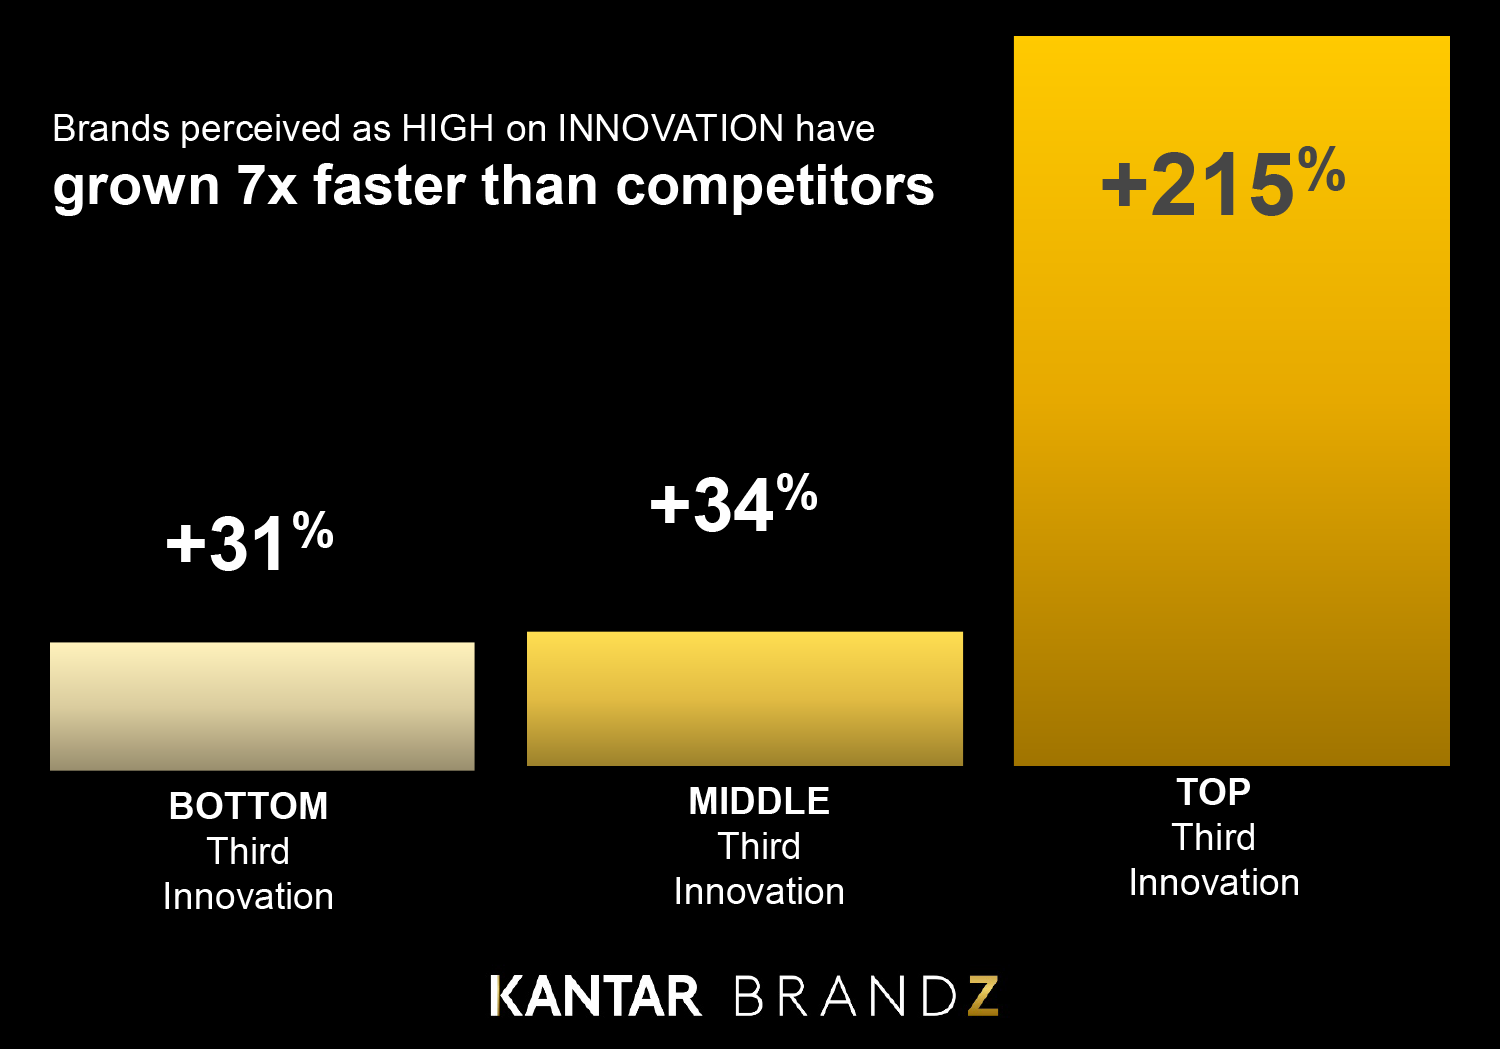 Brands perceived as high on innovation have grown 7x faster than competitors